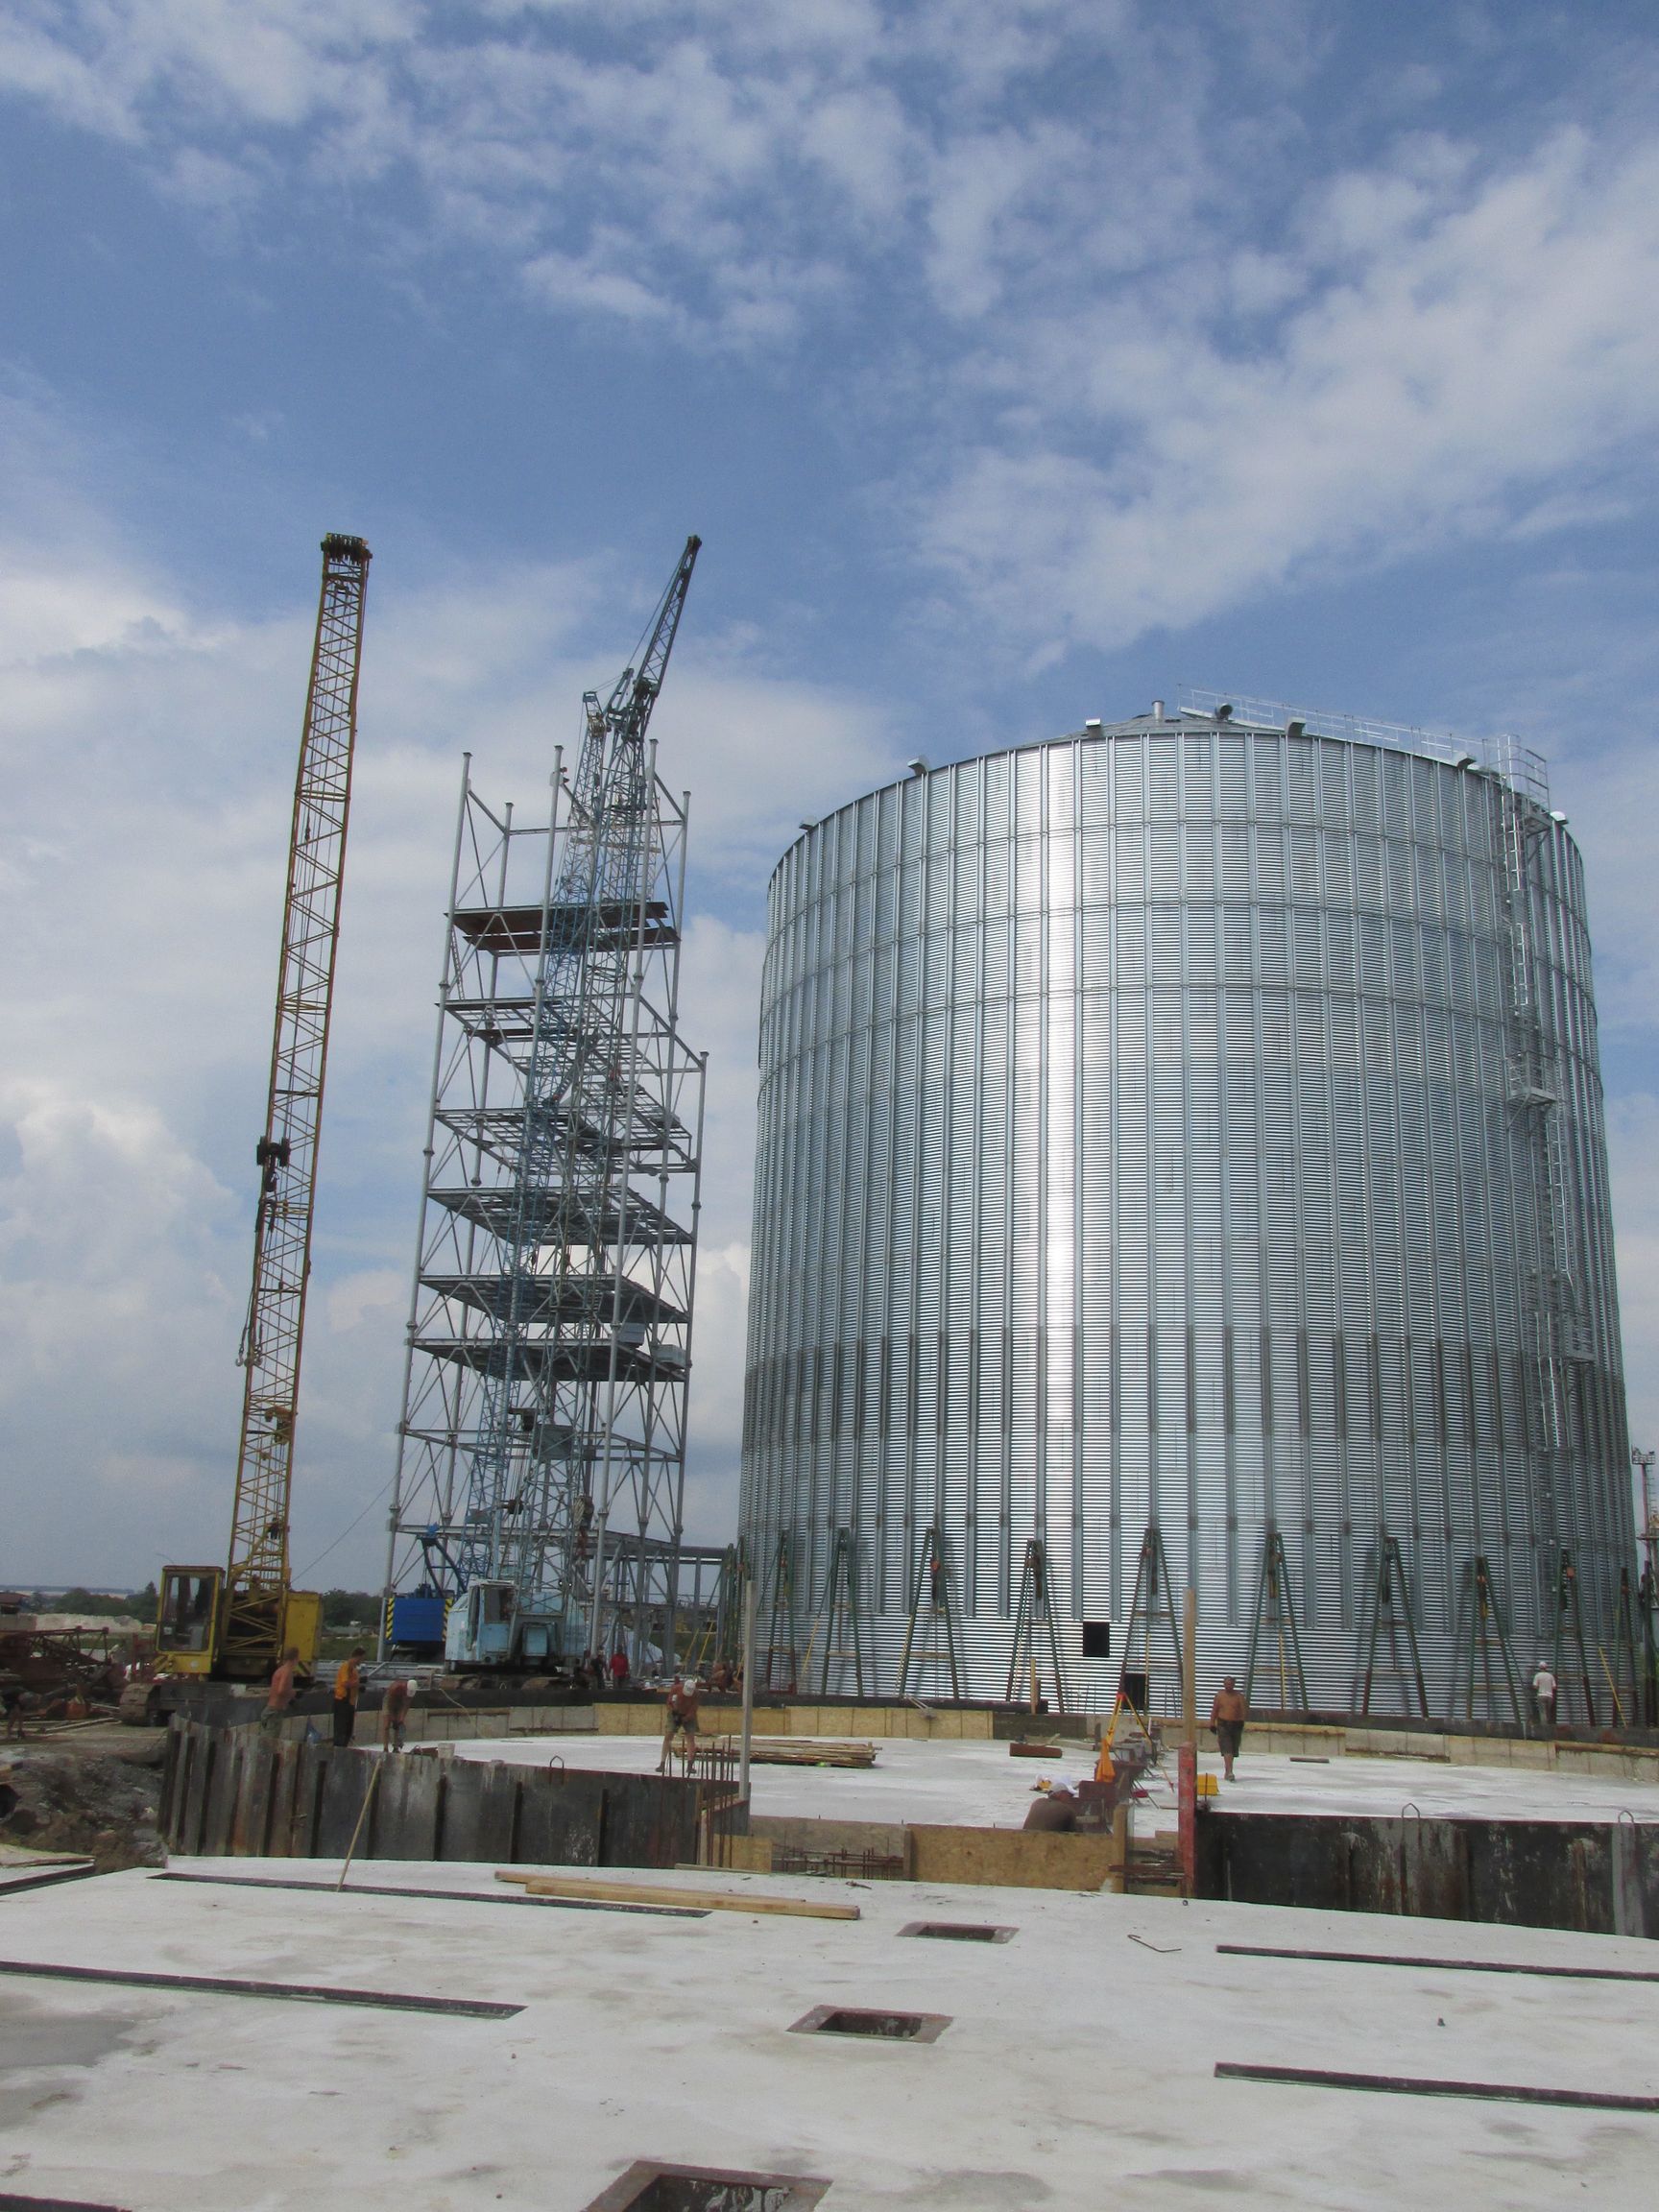 UKRPROMINVEST-AGRO to construct a new silo